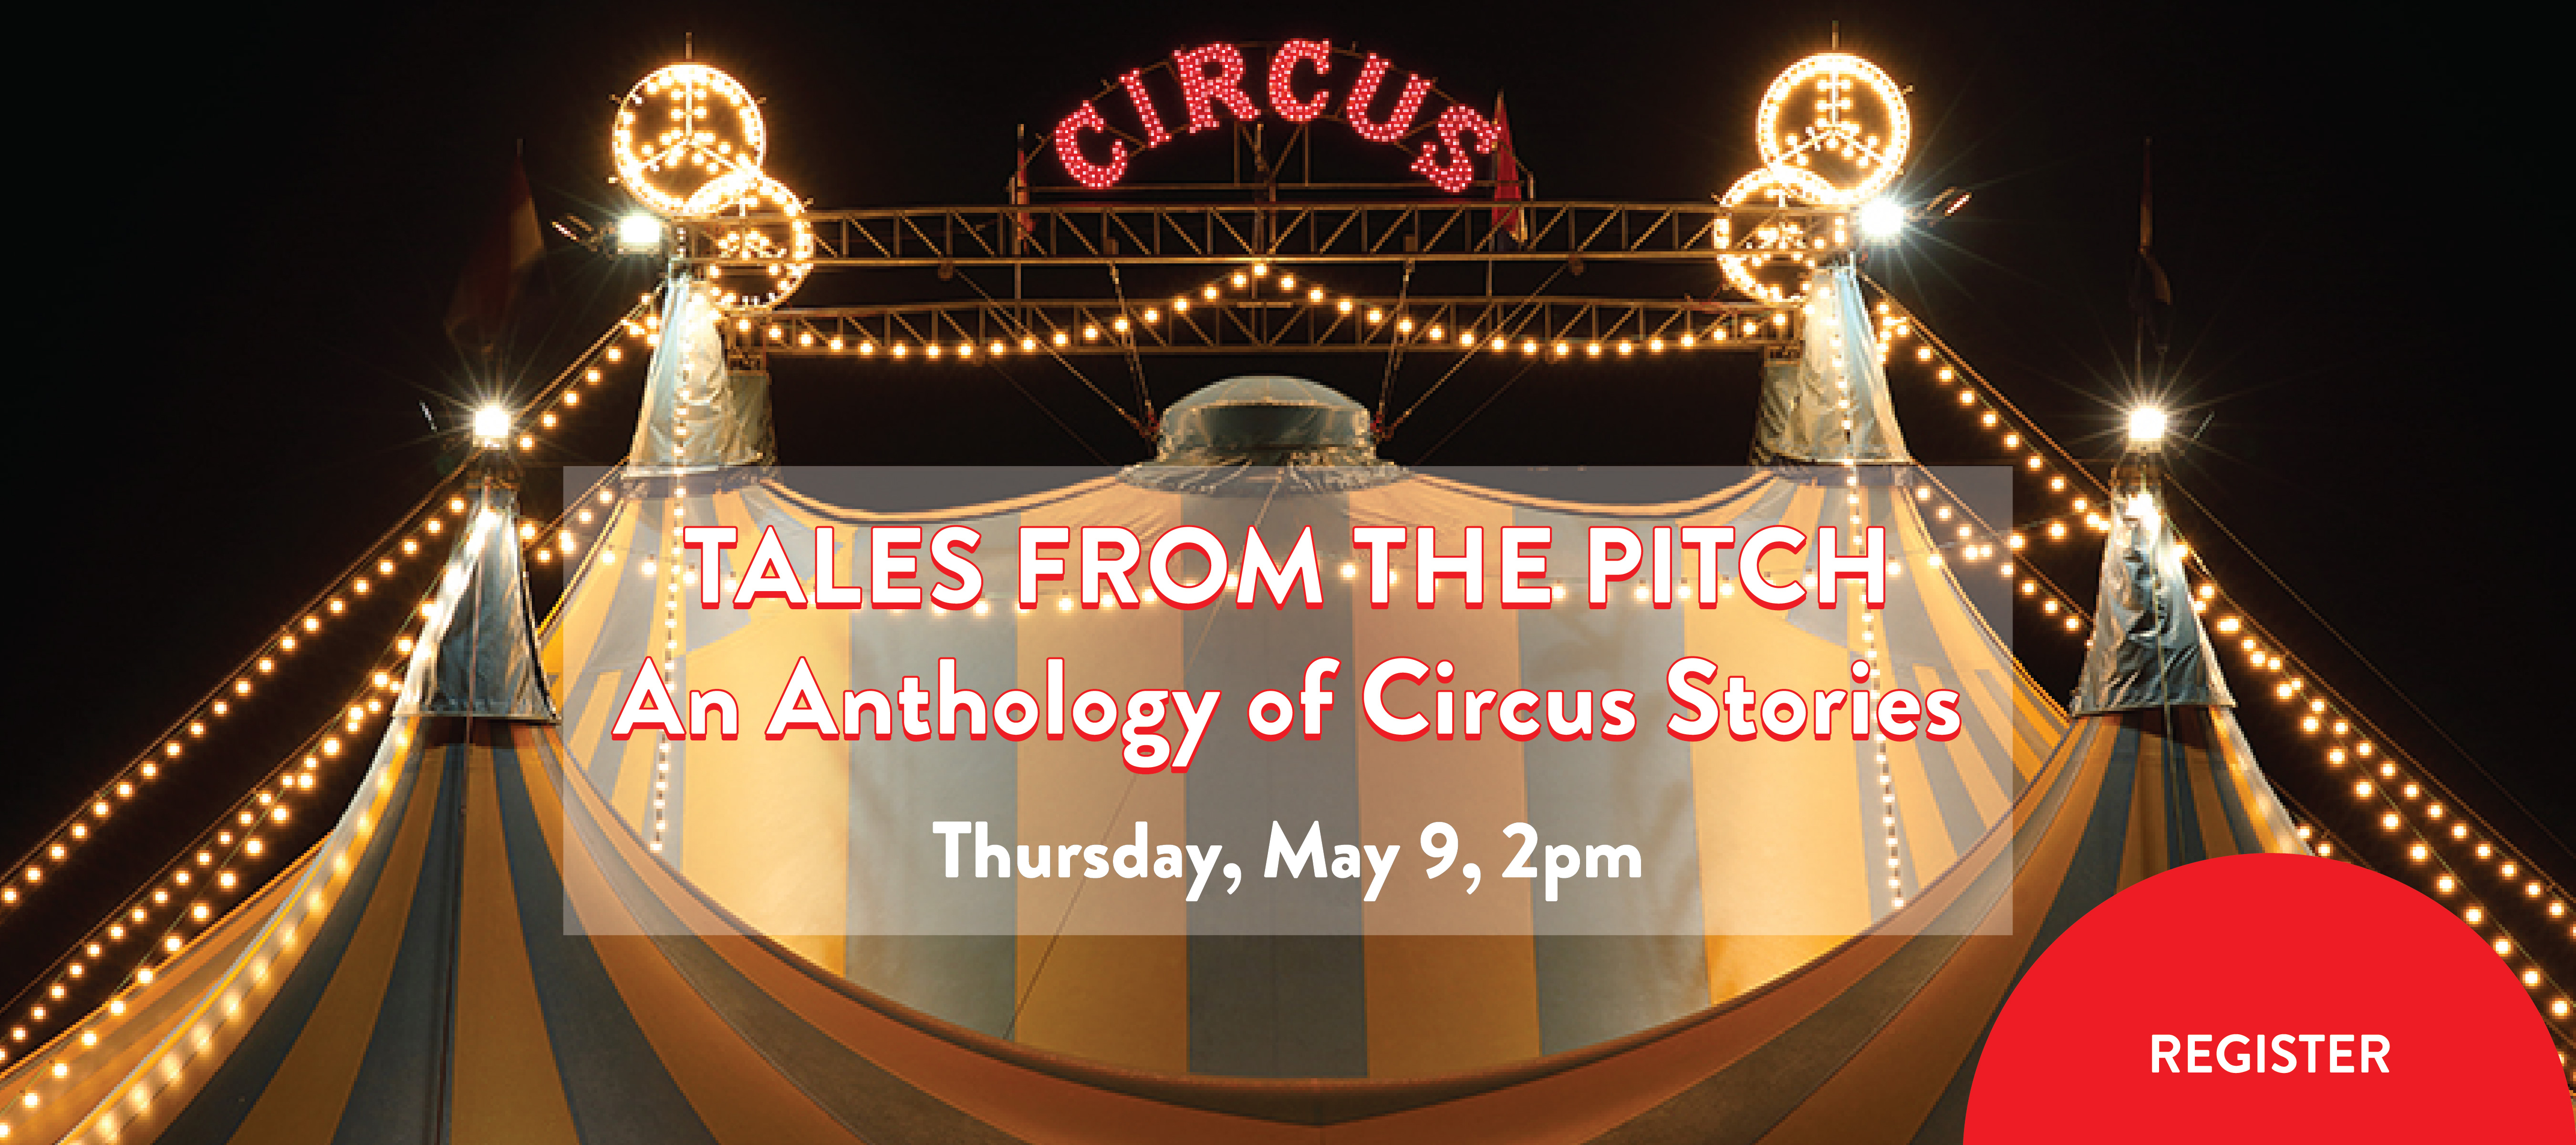 phpl, Prospect Heights Public Library, circus, tales from the pitch, anthology of circus stories, William Pack presenter, live talk, magic, behind the scenes, Adult